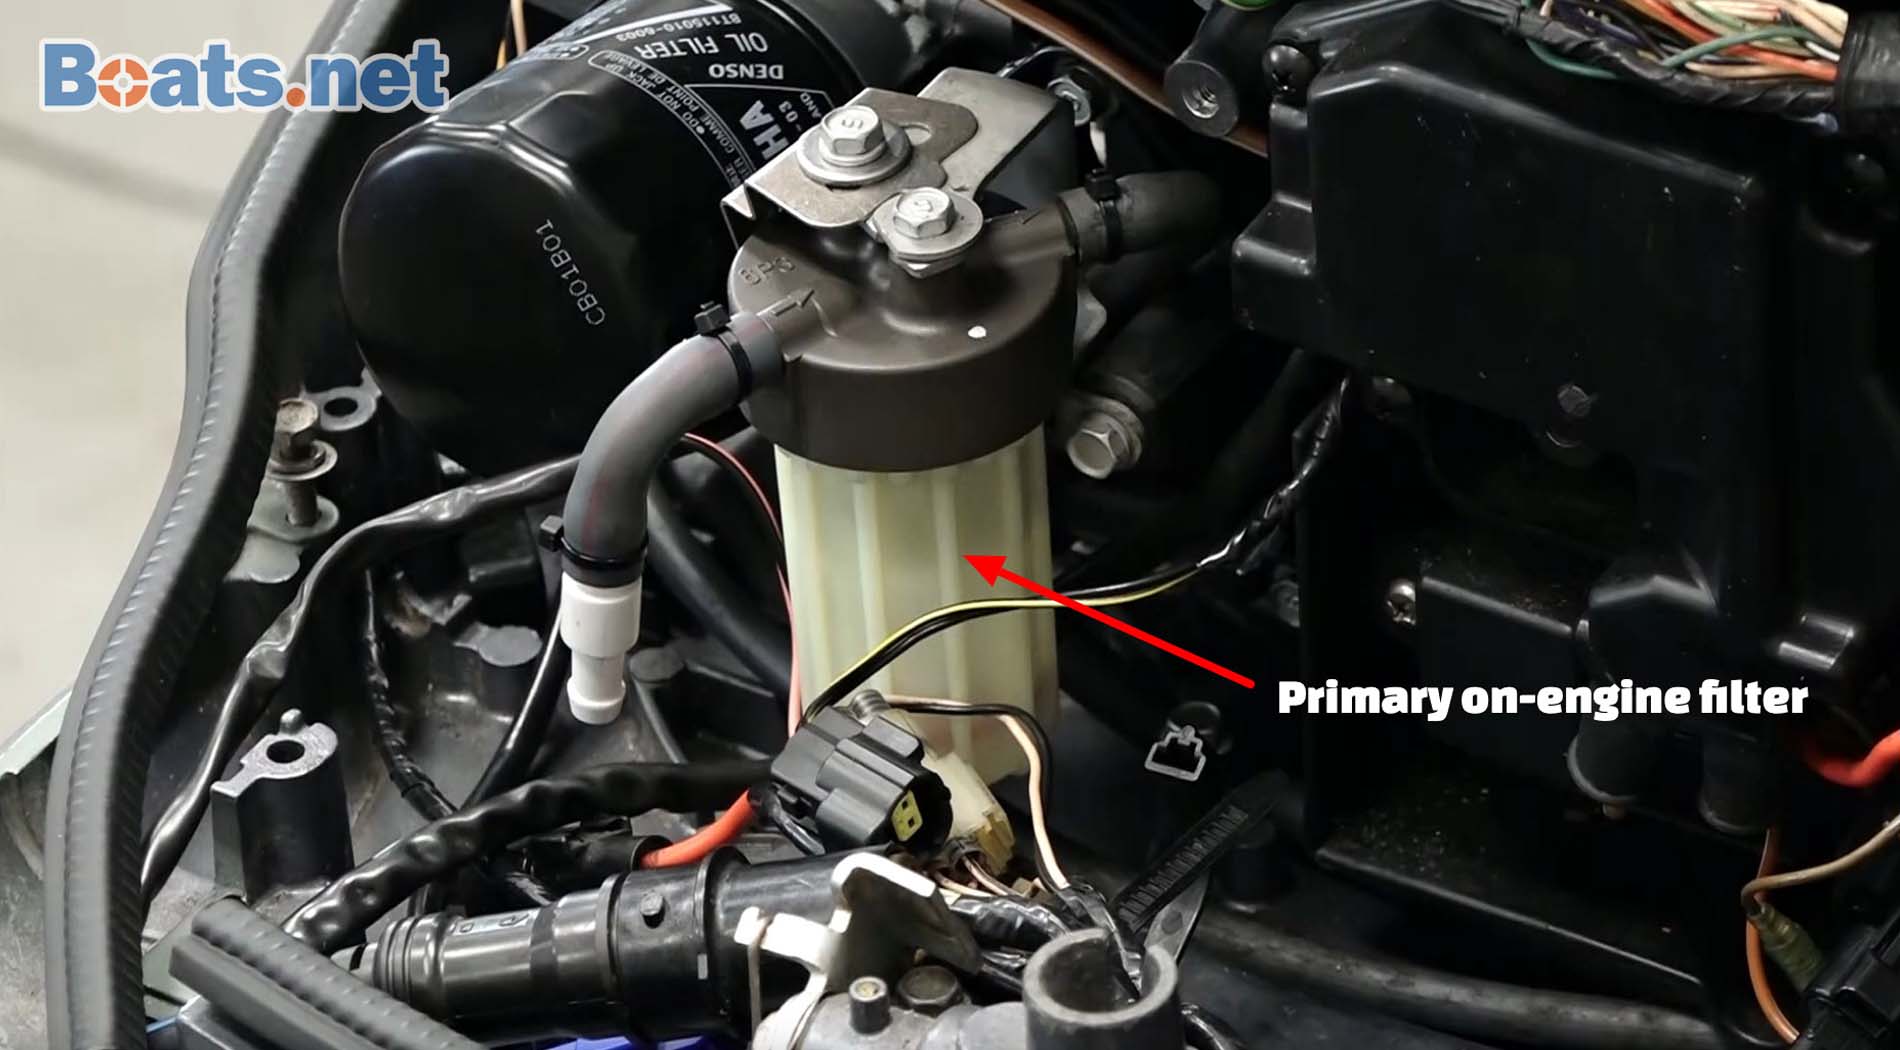 Yamaha outboard primary on-engine fuel filter